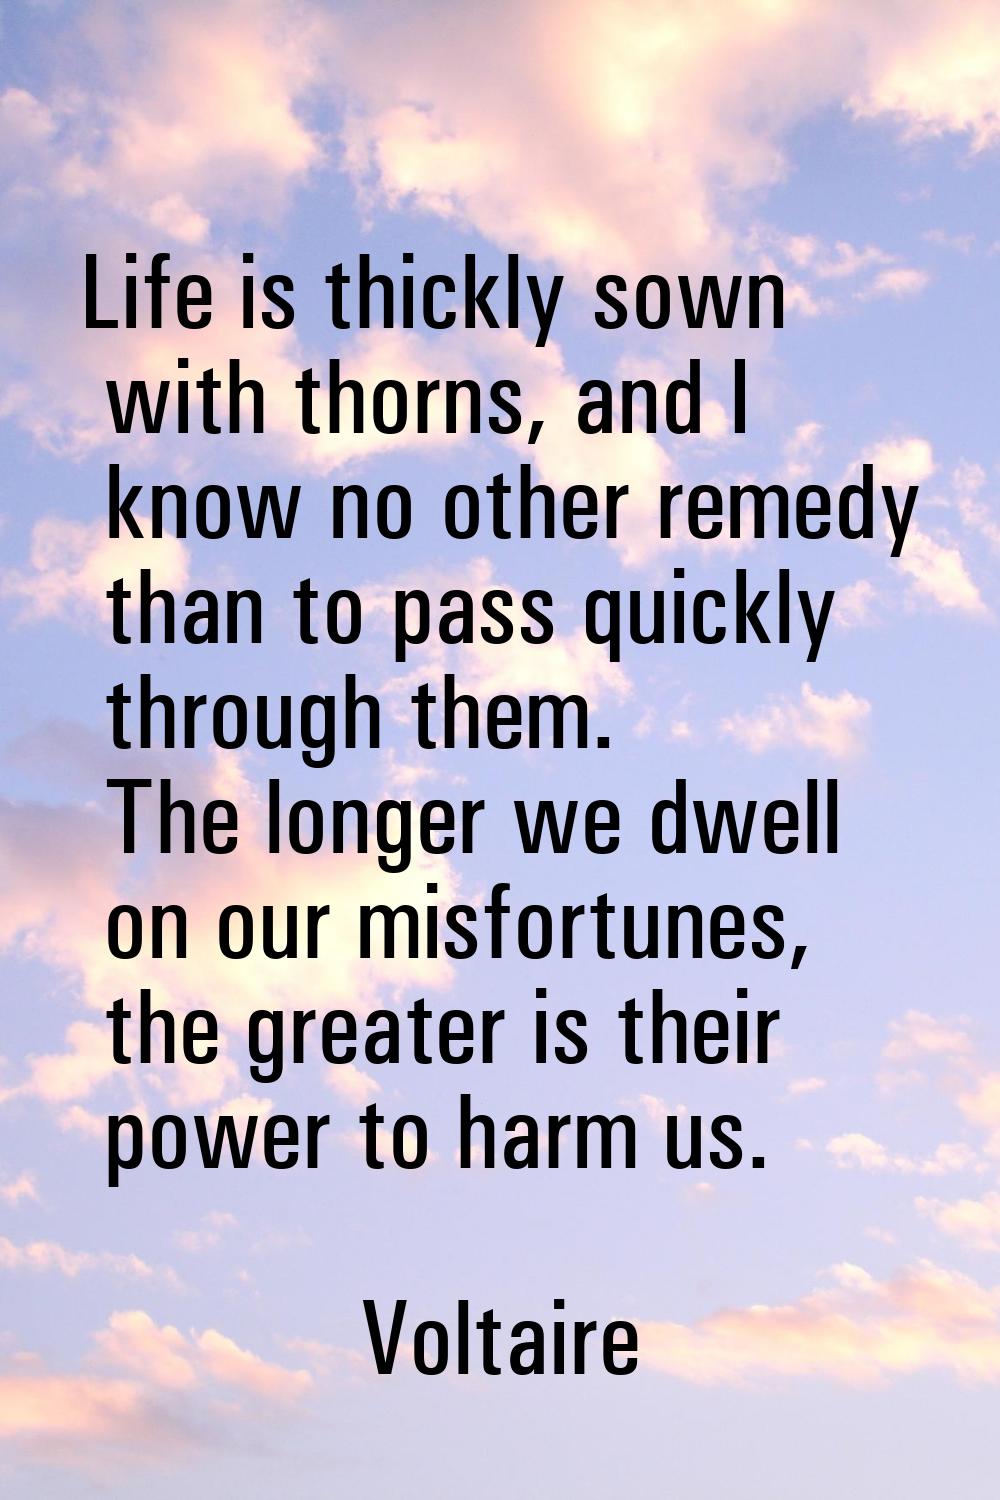 Life is thickly sown with thorns, and I know no other remedy than to pass quickly through them. The